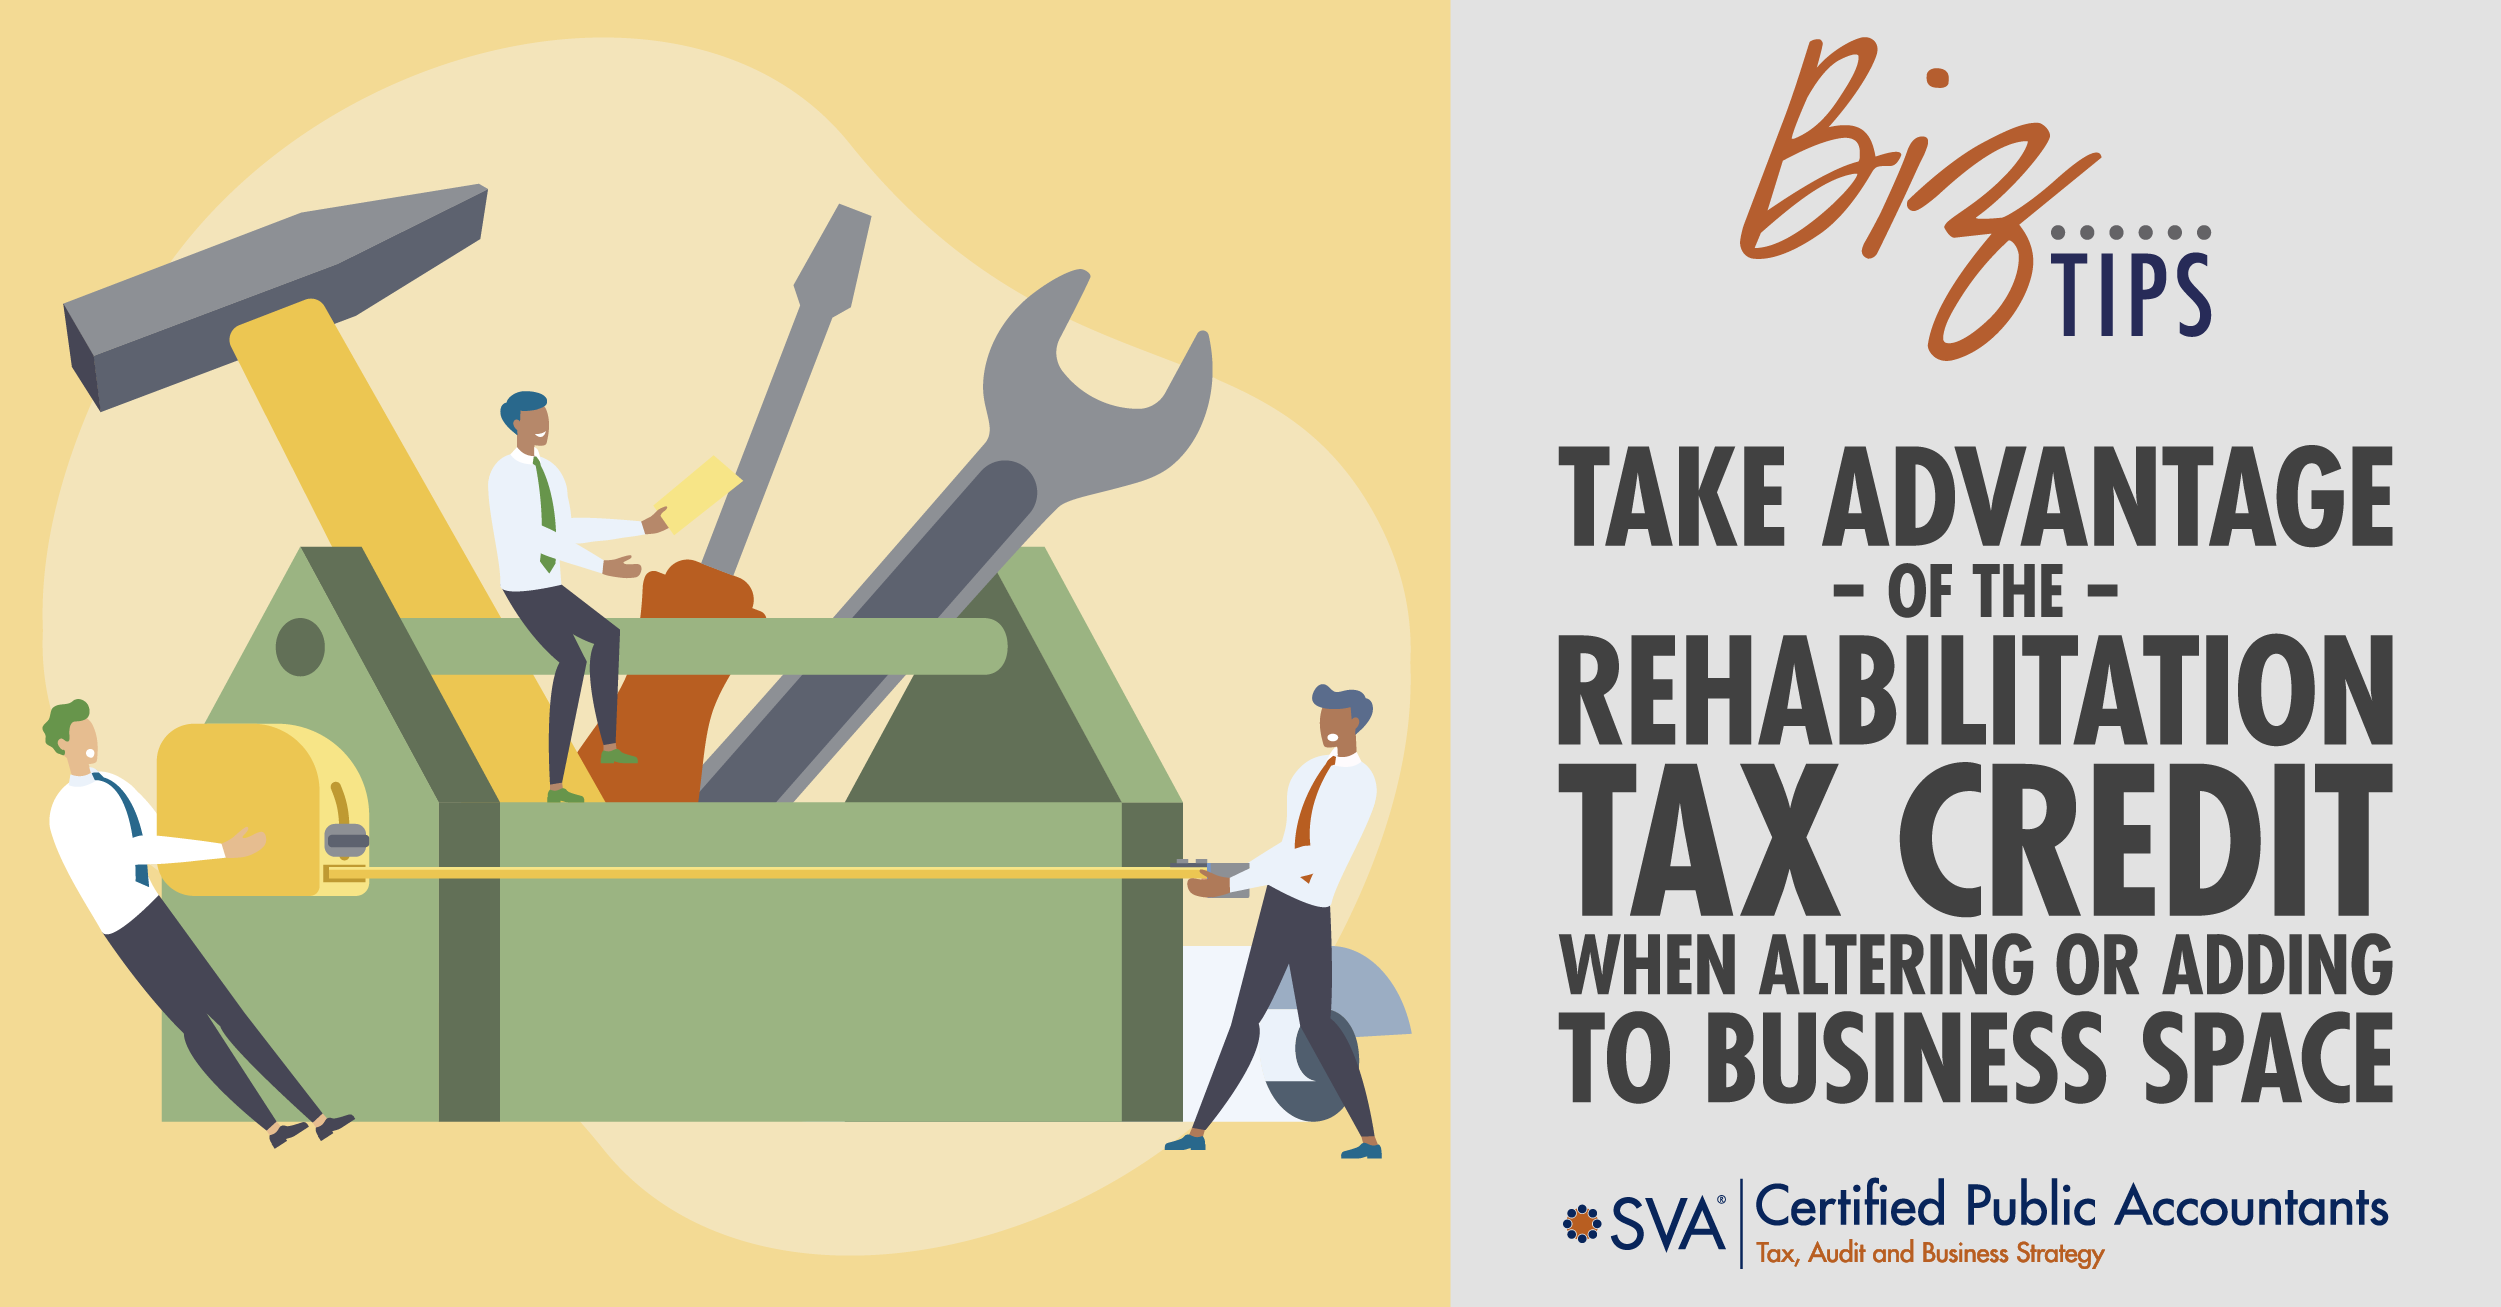 Take Advantage of the Rehabilitation Tax Credit When Altering or Adding to Business Space